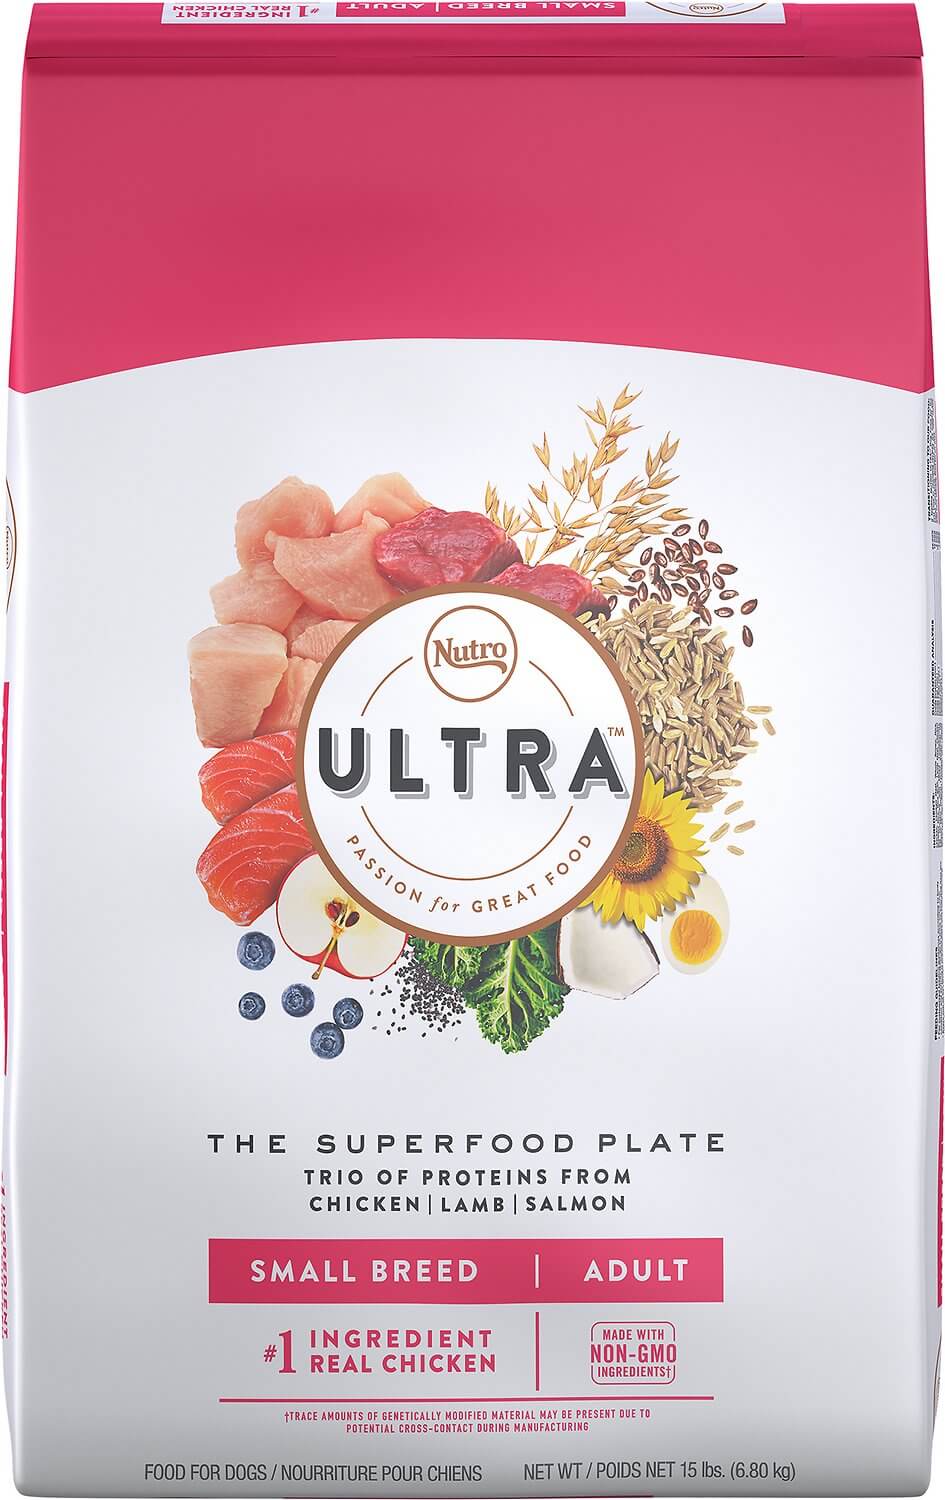 Nutro Ultra Dog Food | Review | Rating 